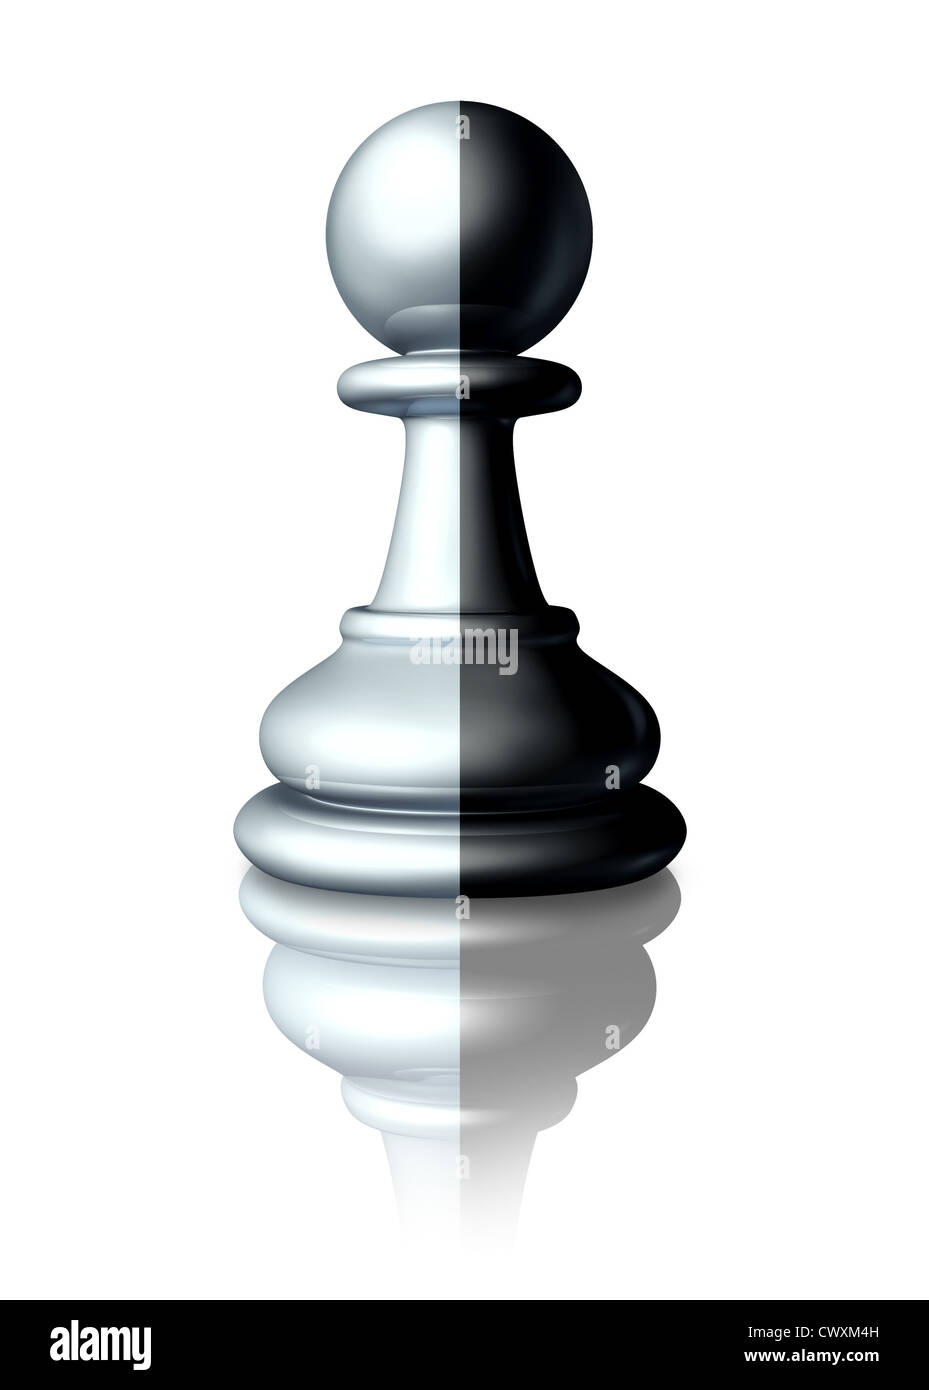 Two faced or double agent secret agent as symbolised by a chess pawn that is painted white and black as a dishonest liar pretending to be somebody else or a symbol of ethnic race and racial equality. Stock Photo